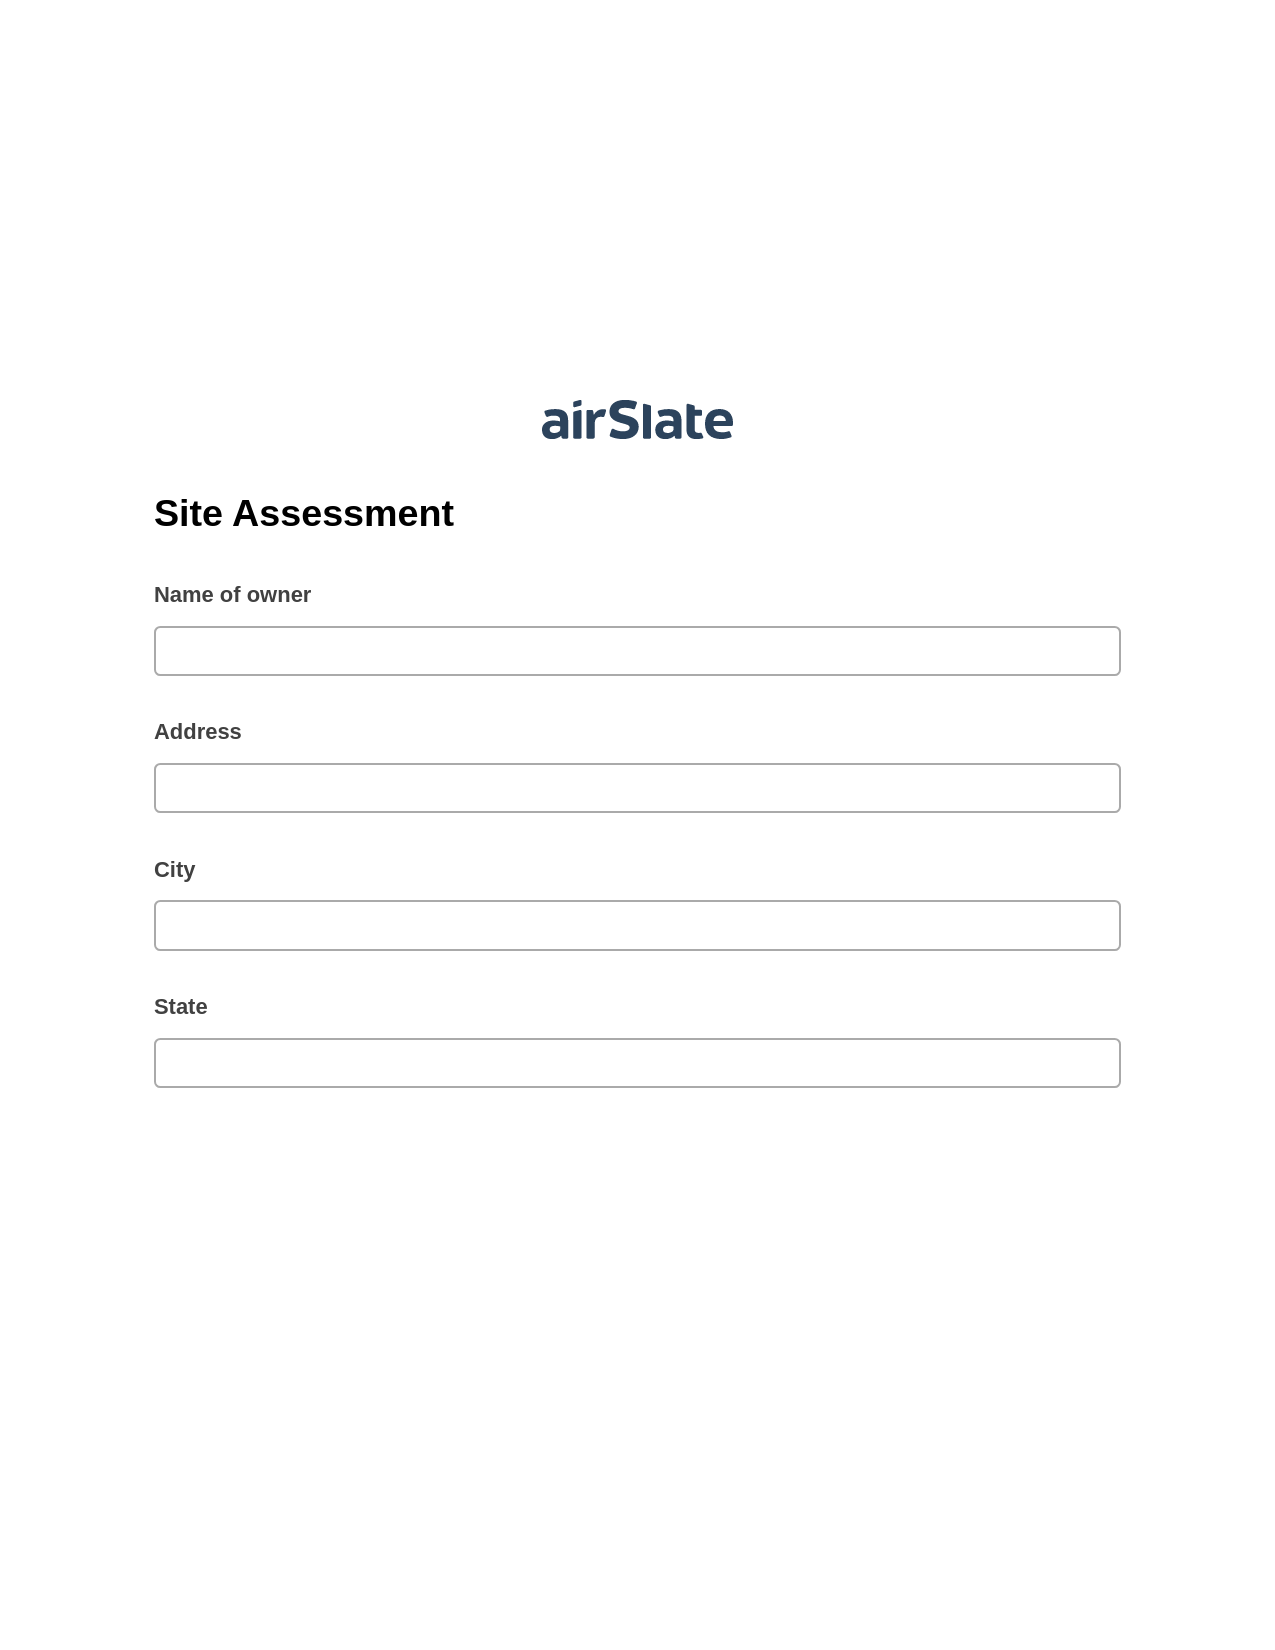 Site Assessment Pre-fill from NetSuite Records Bot, Update NetSuite Records Bot, Export to NetSuite Record Bot